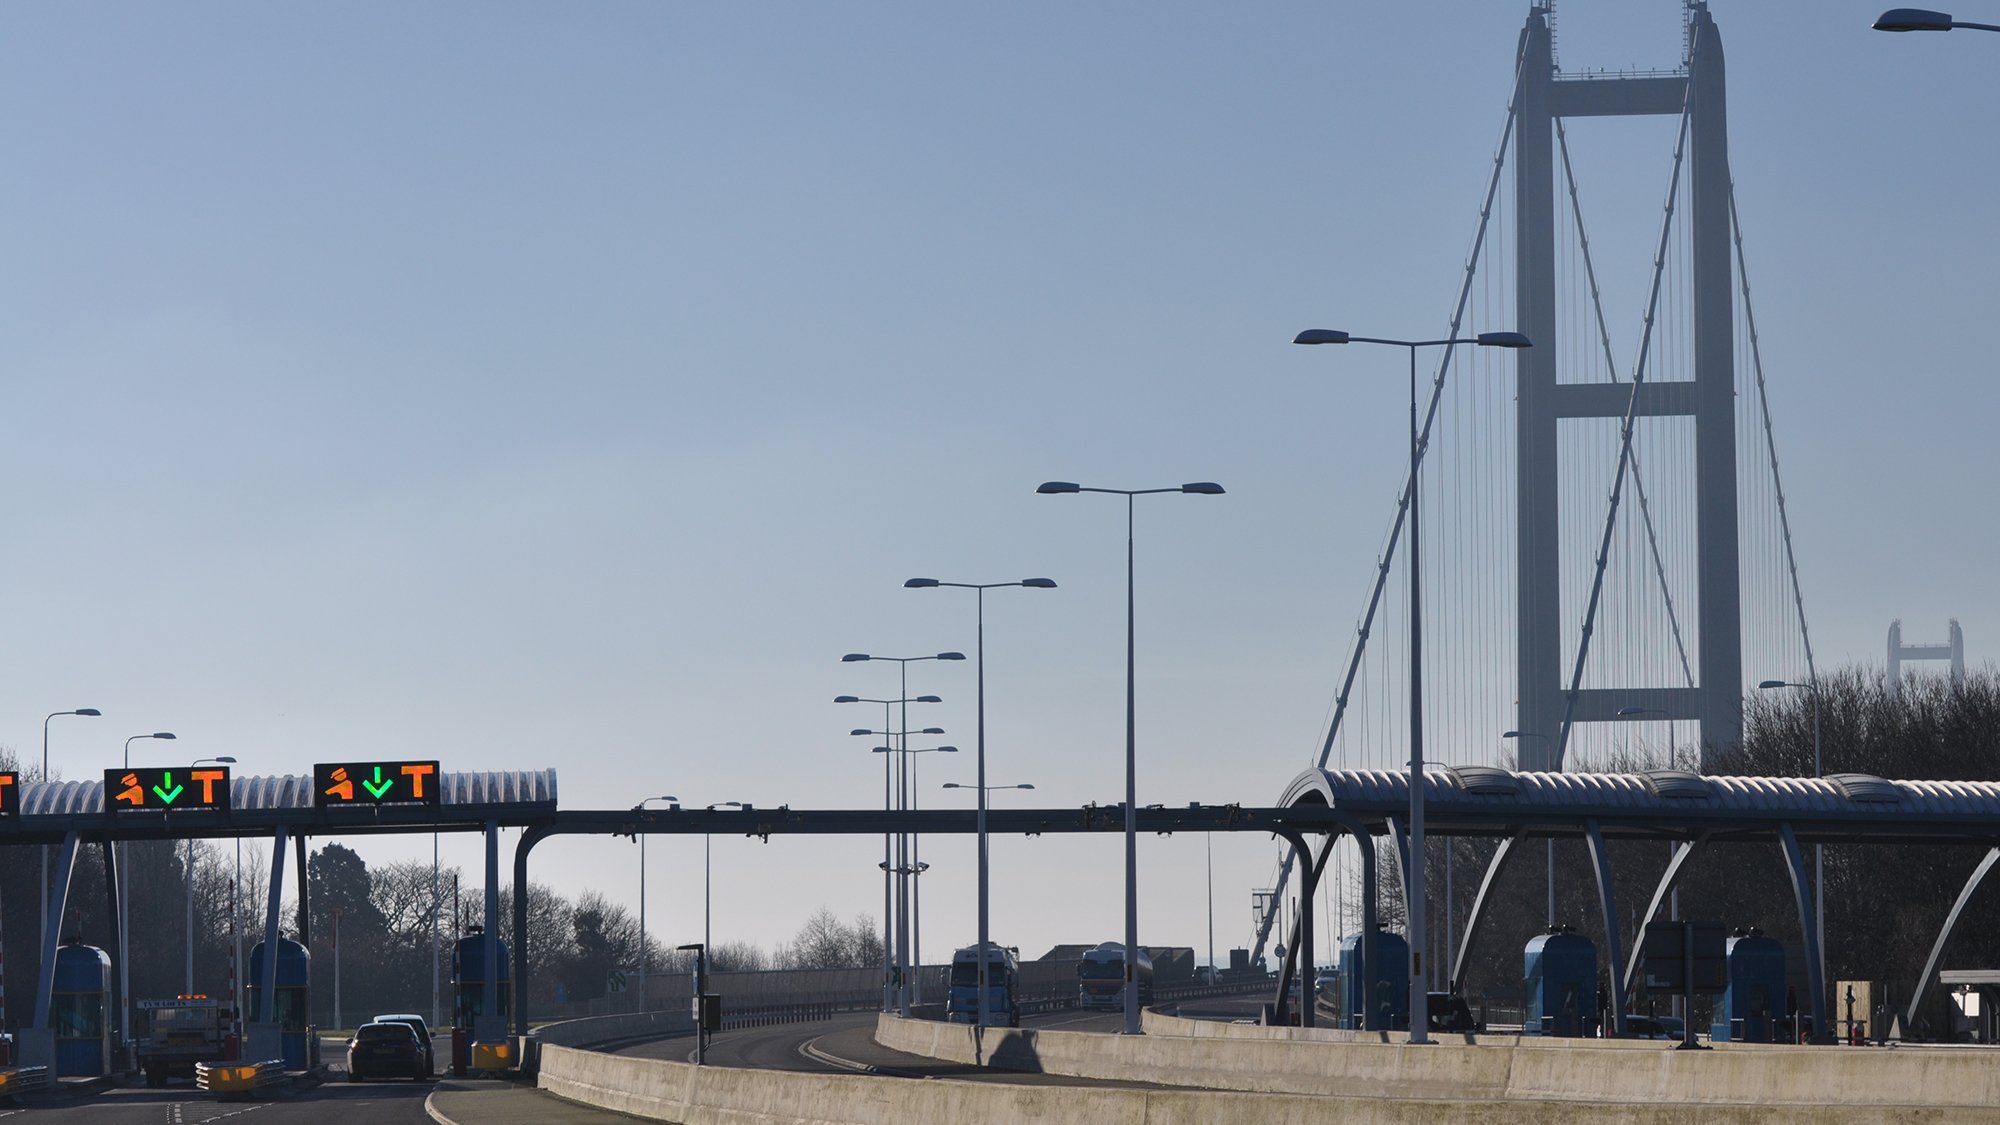 Tolling lanes and booths at the entrance to the Humber Bridge